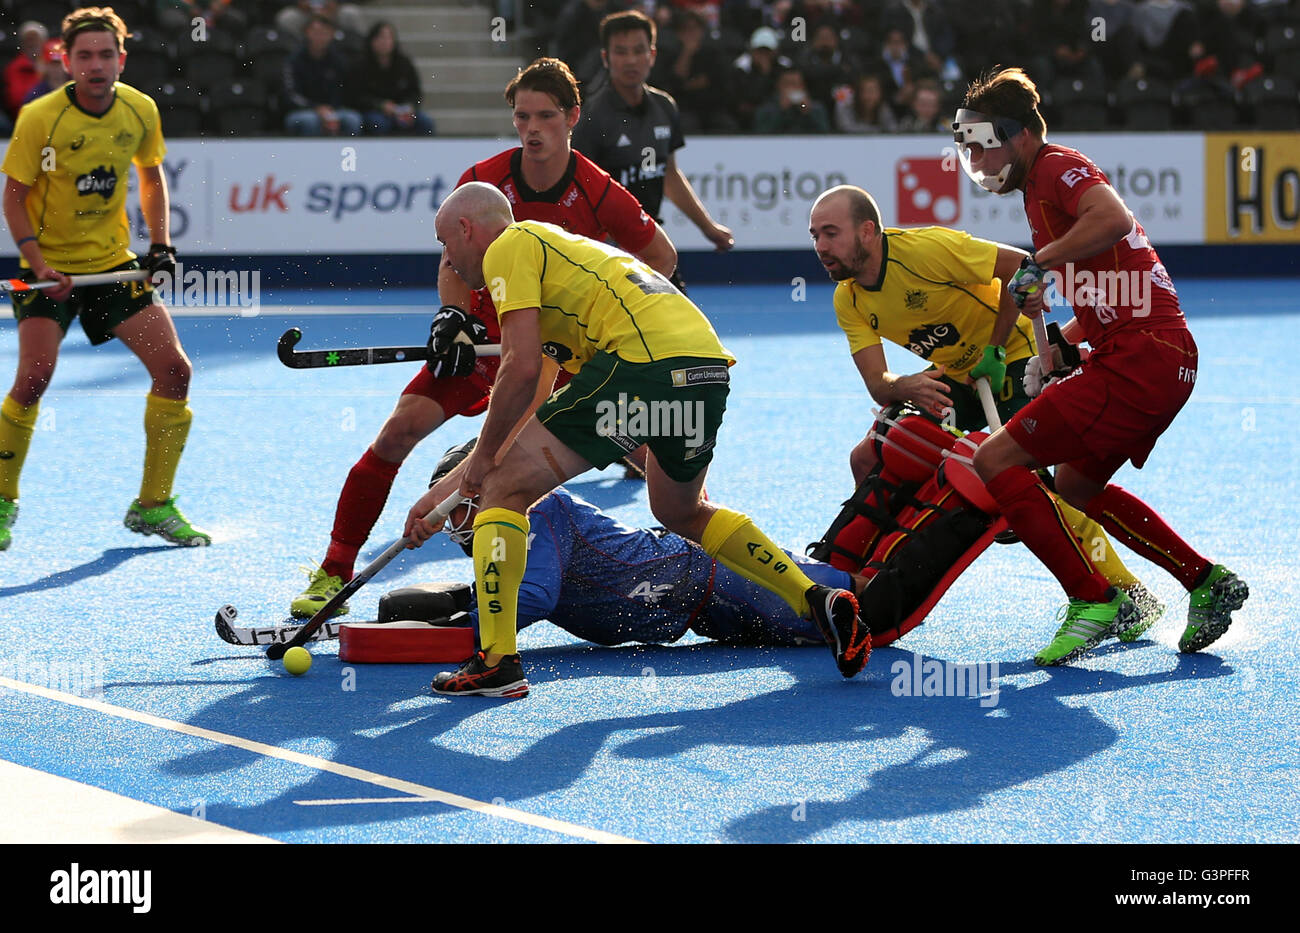 Belgium goalkeeper Vincent Vanasch dives to make a save form Australia's Glenn Turner and Australia's Tristan White battle for the ball during day four of the FIH Men's Champions Trophy at the Queen Elizabeth Olympic Park, London. Stock Photo